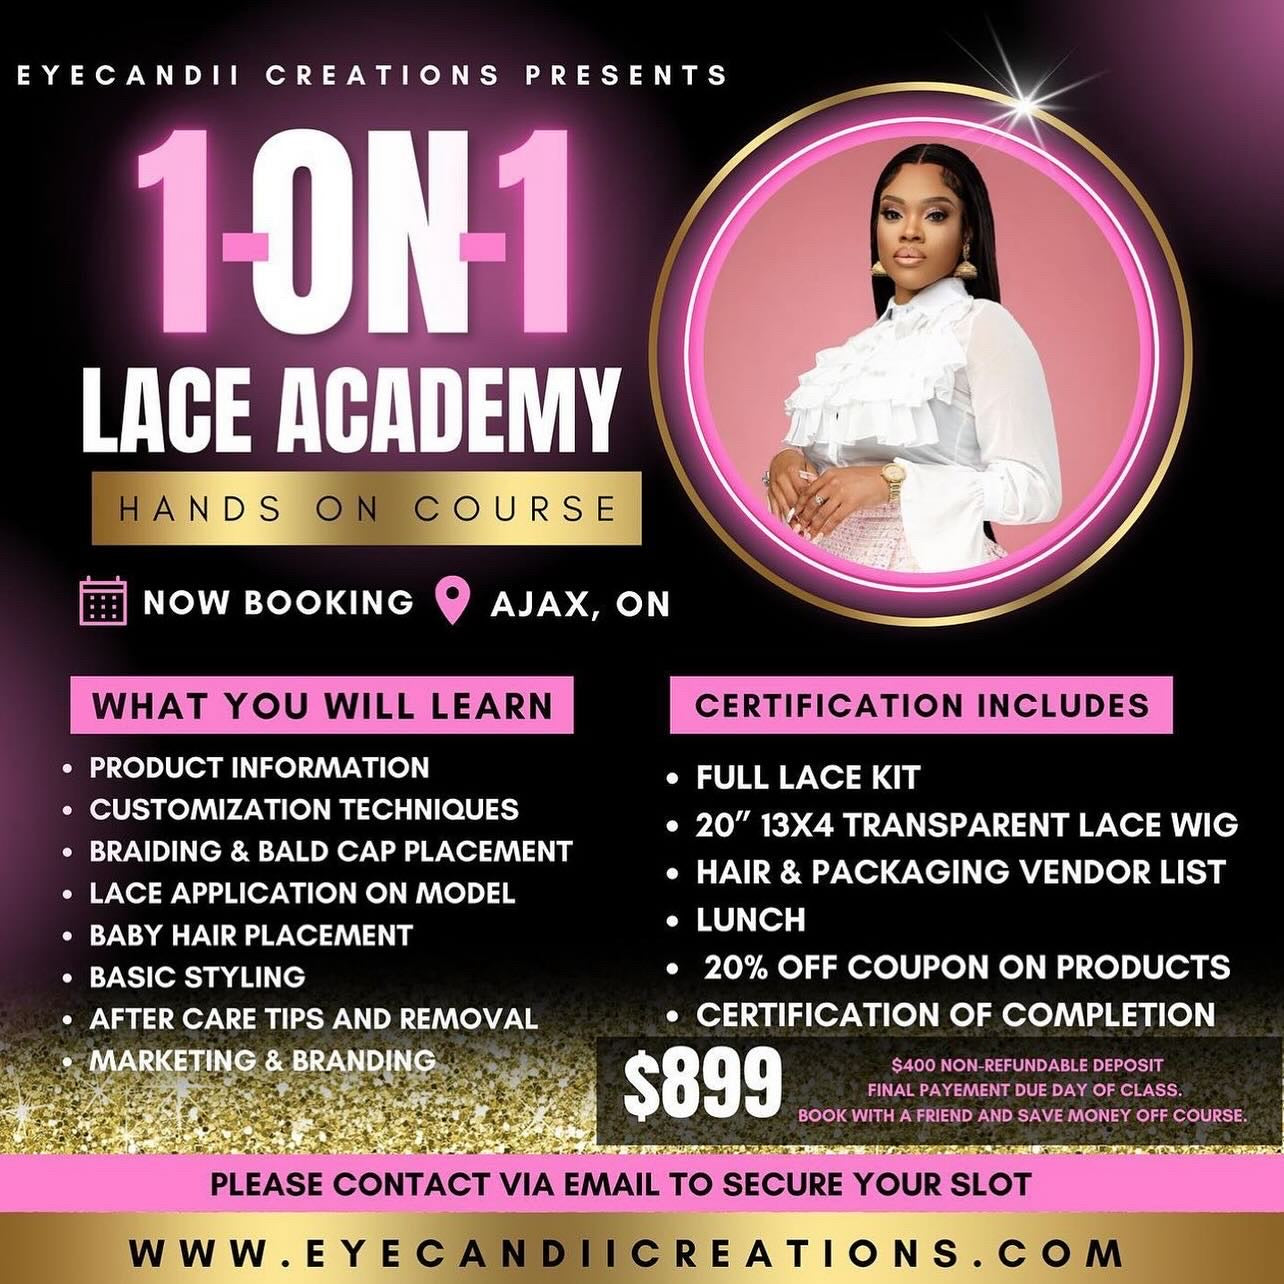 1-ON-1 LACE ACADEMY HANDS ON COURSE